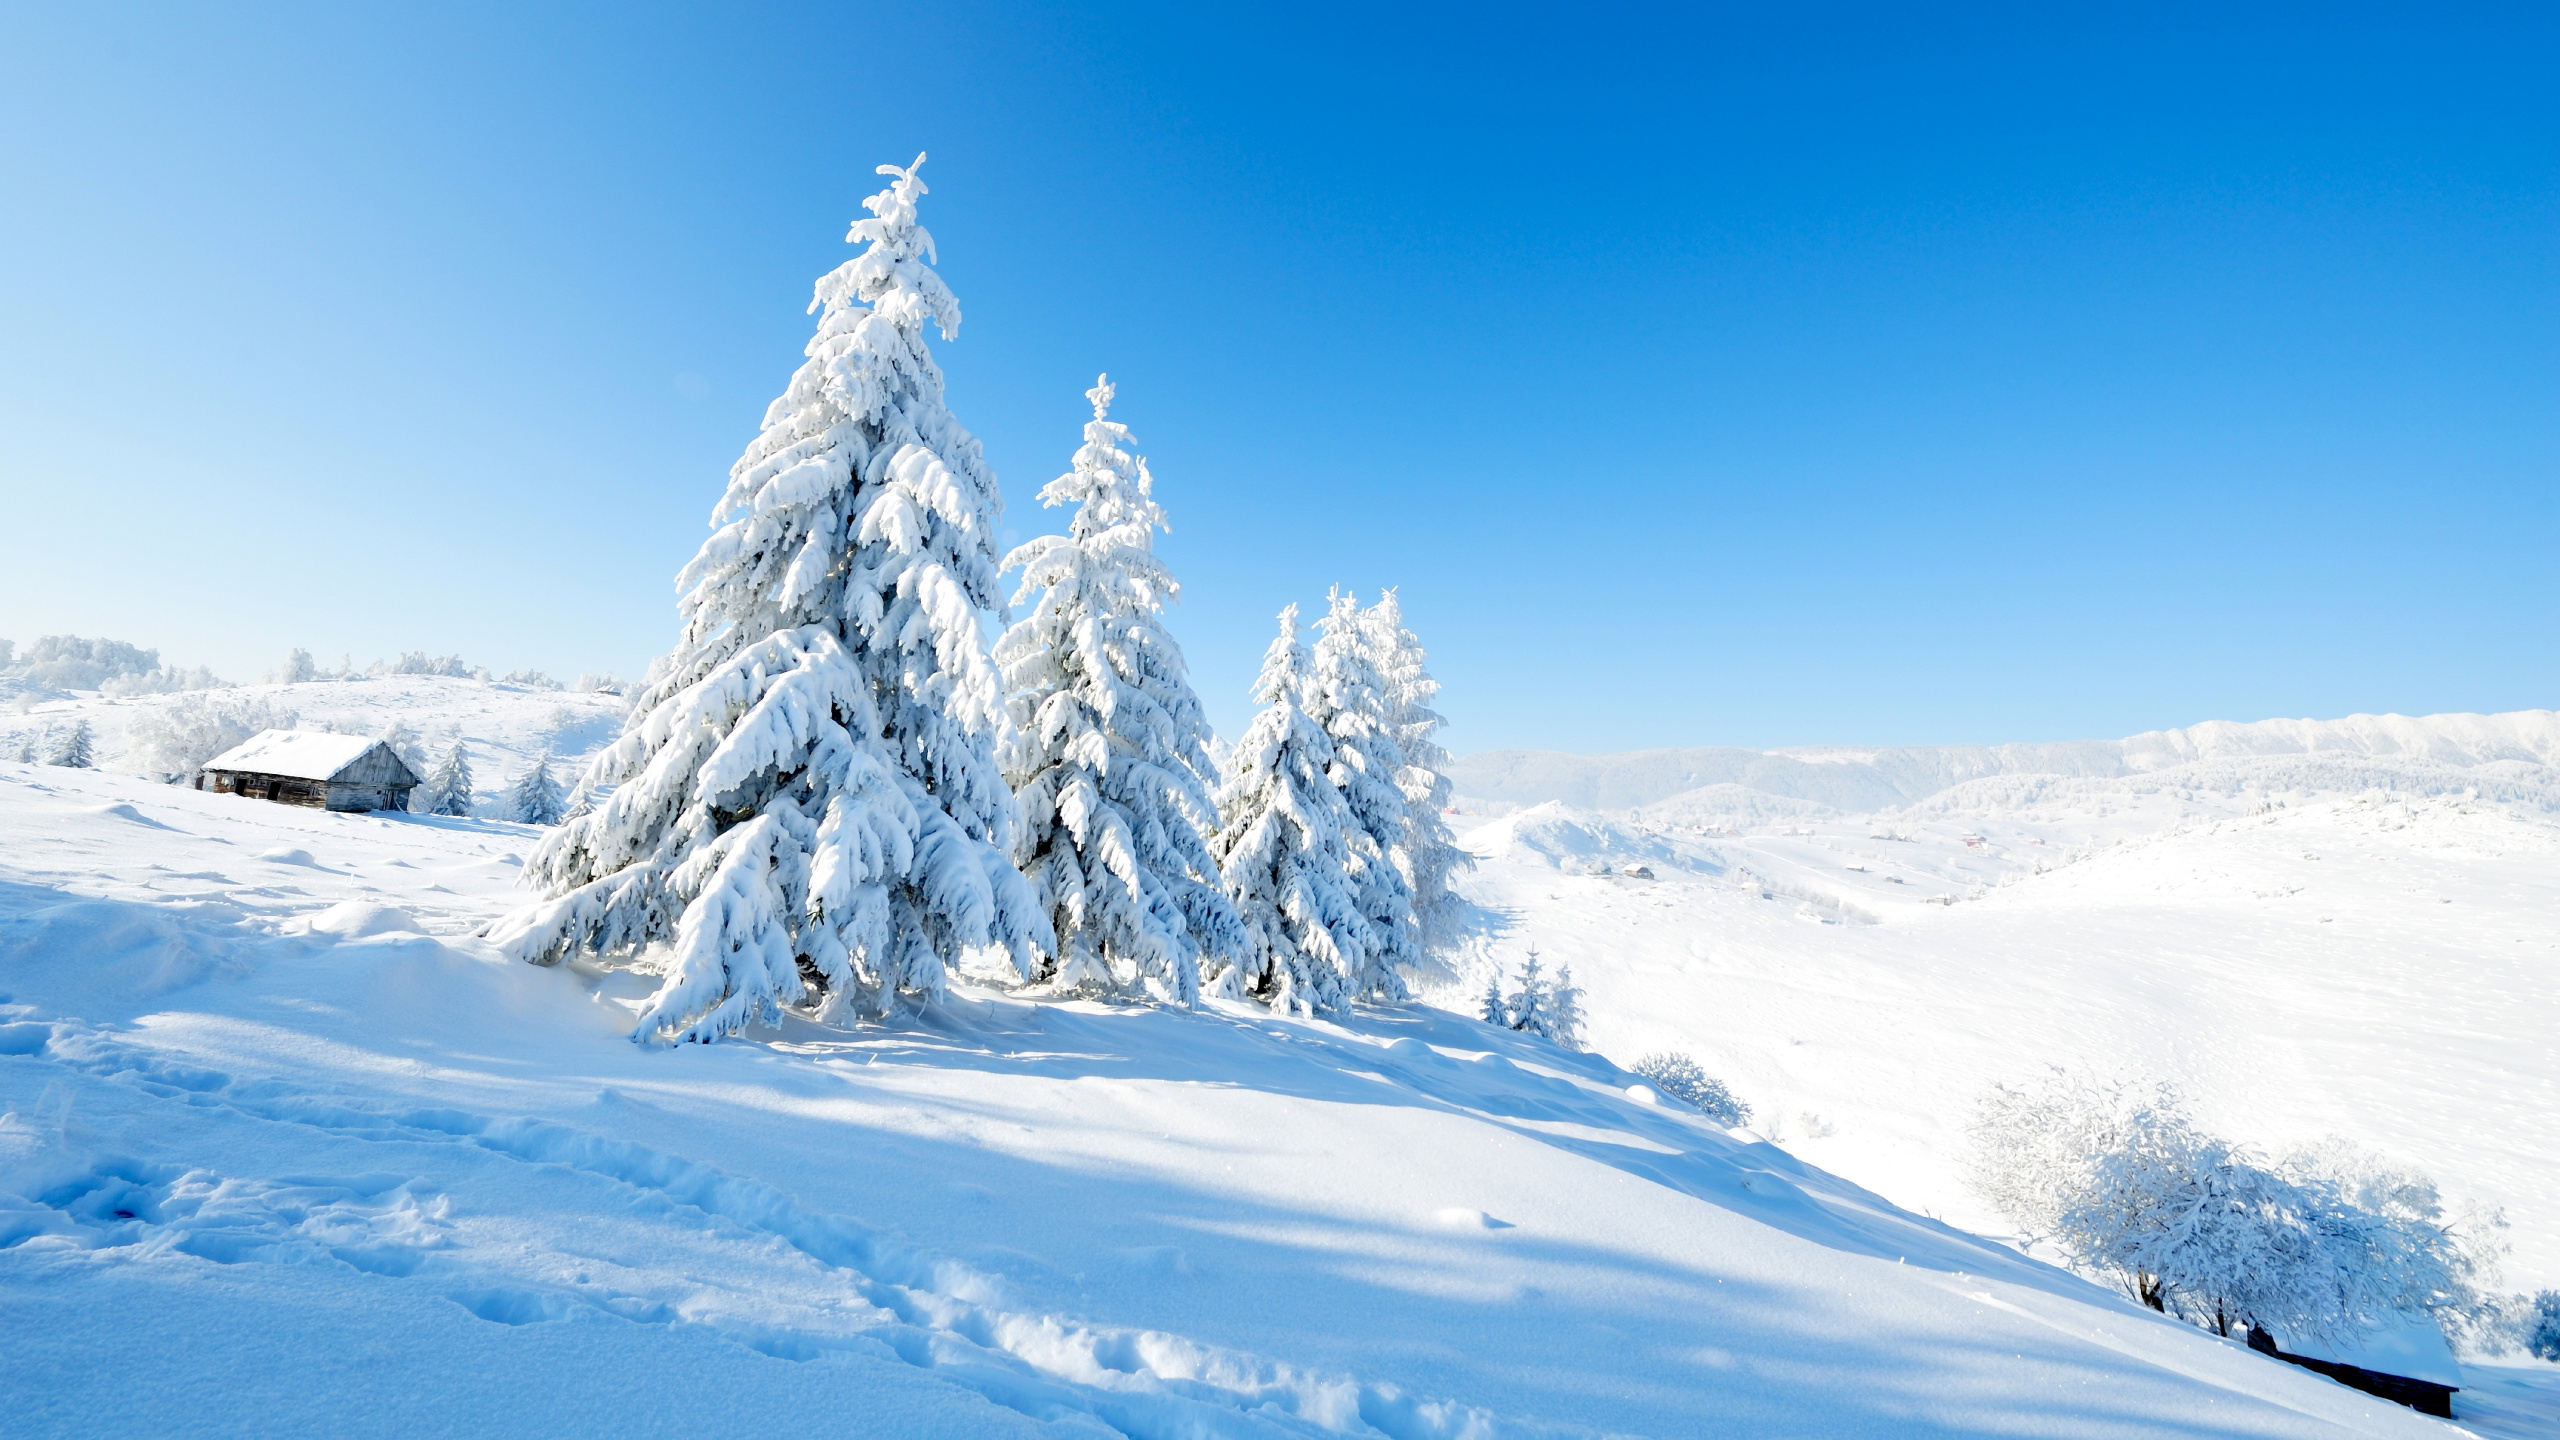 Snow Covered Pine Trees on Snow Covered Ground Under Blue Sky During Daytime. Wallpaper in 2560x1440 Resolution